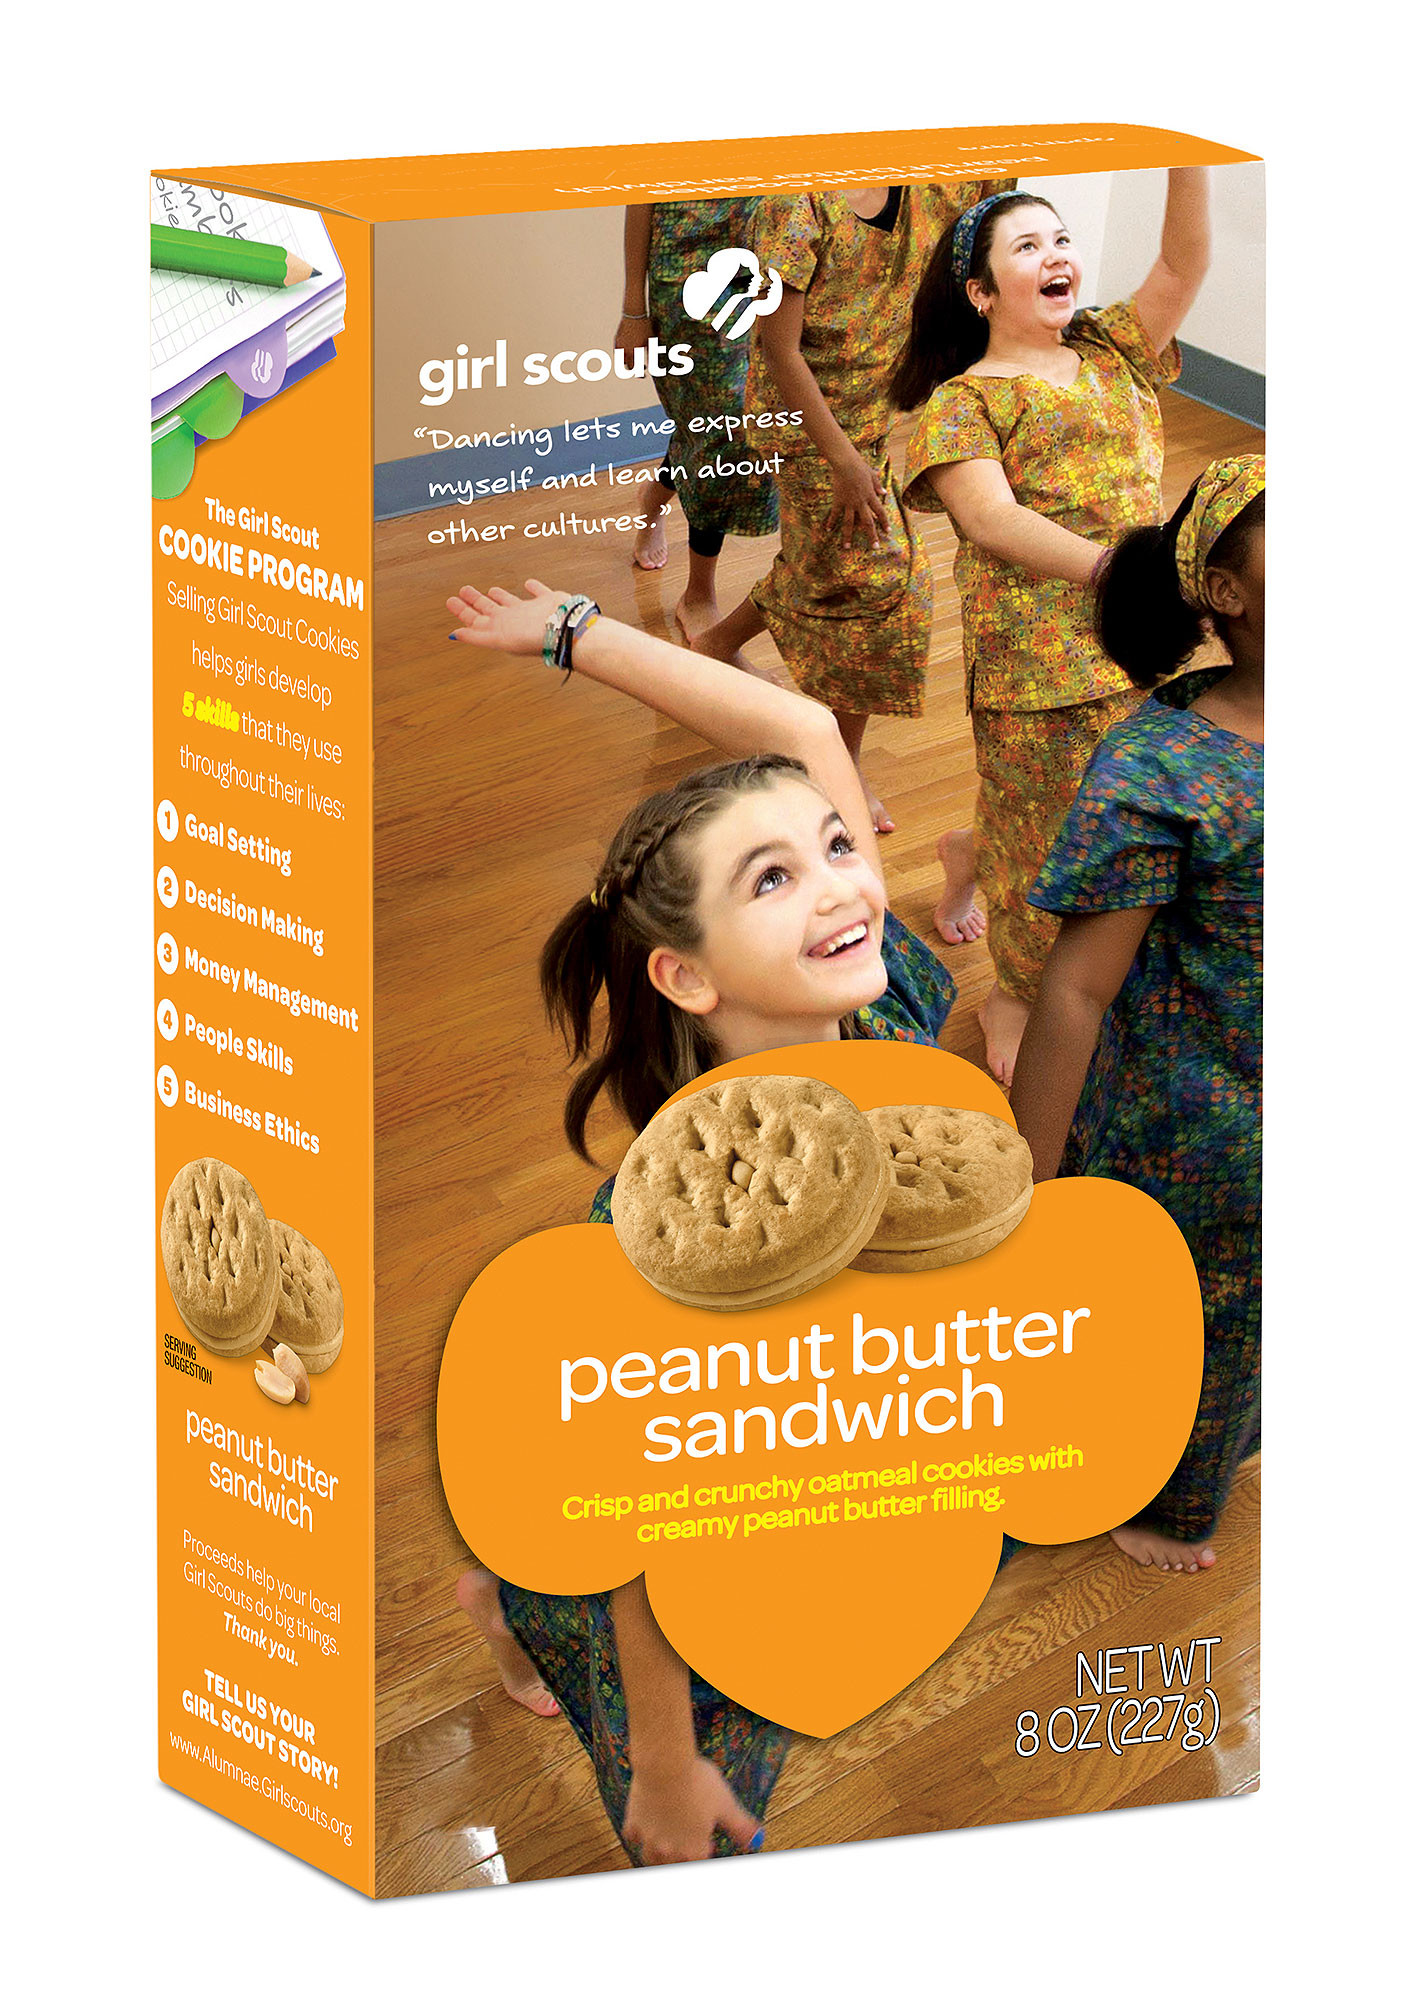 Girl Scout Cookies Peanut Butter
 Girl Scout Cookies Find Out How Many Calories in Each